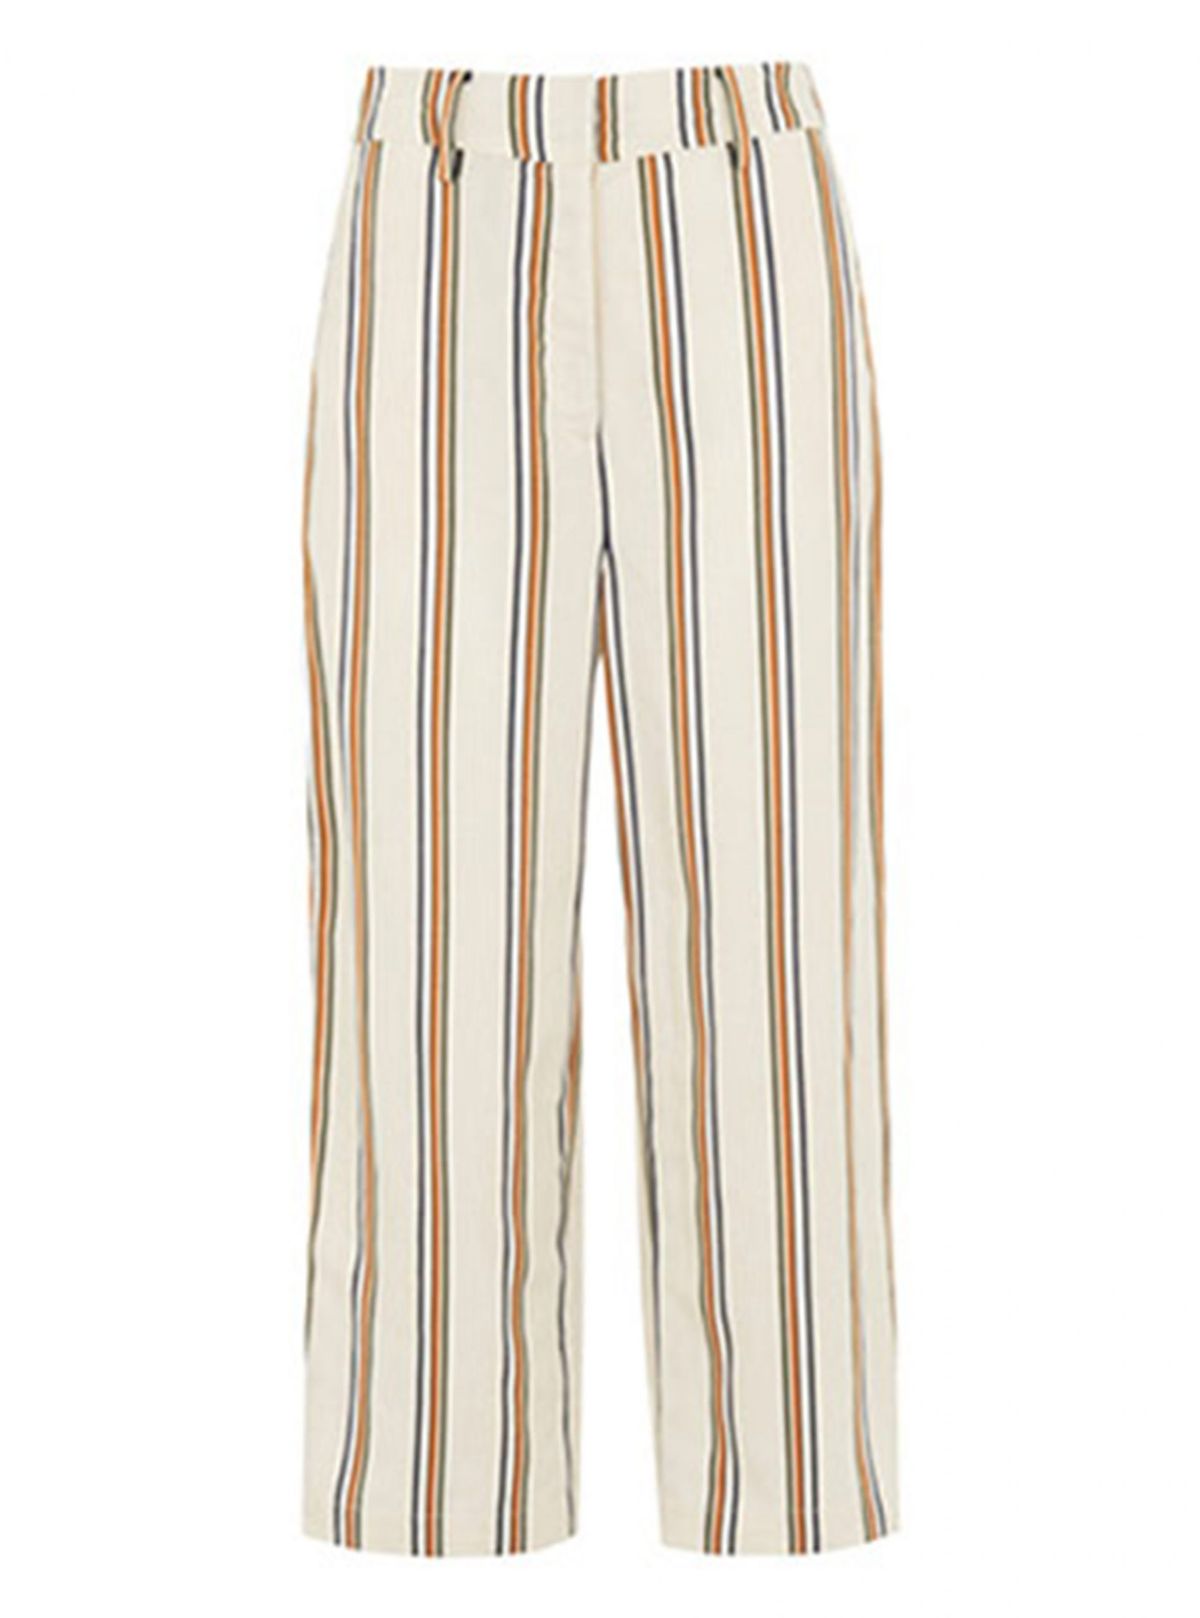 The Flattering Cropped Trousers You'll Wear All Summer | Woman & Home